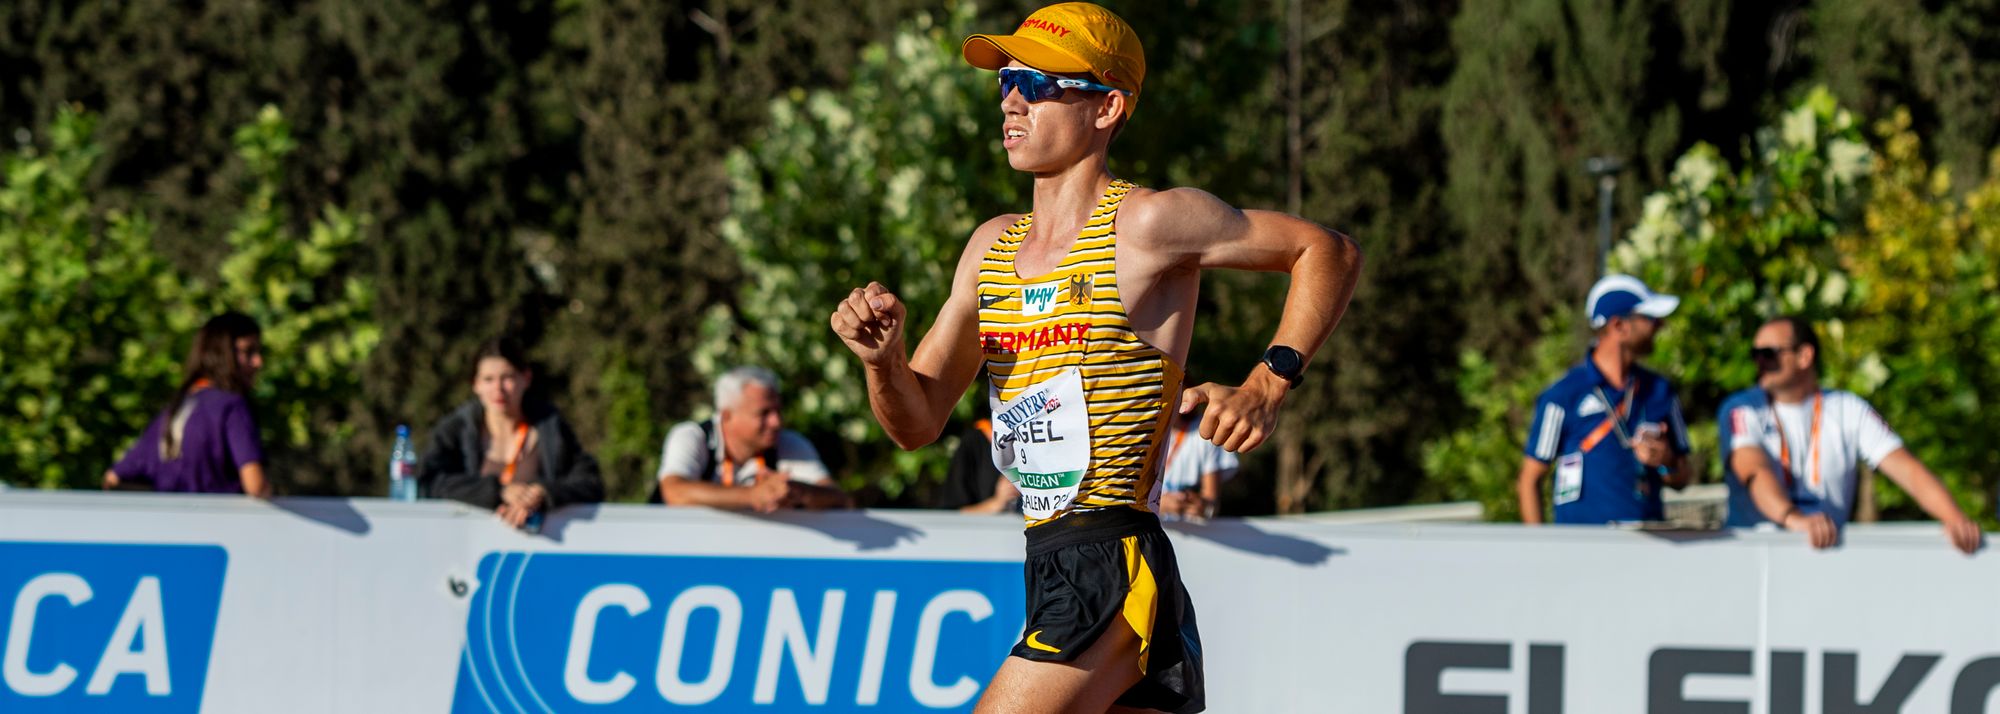 A look at the leading contenders in the U20 men's 10km at the World Athletics Race Walking Team Championships Antalya 24